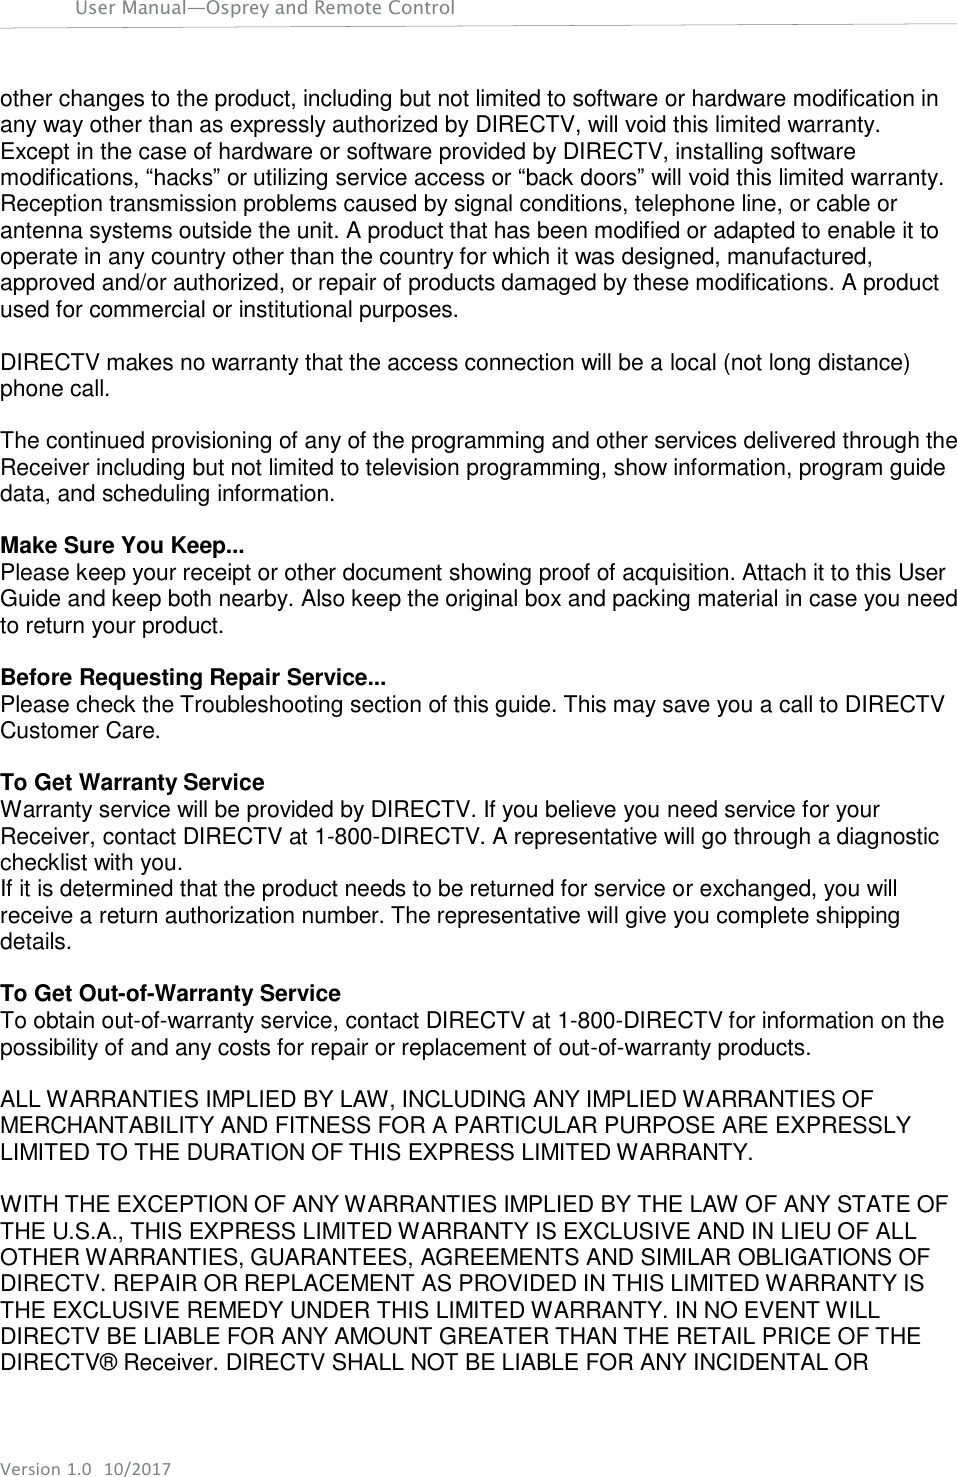 Version 1.0  10/2017 User Manual—Osprey and Remote Control     other changes to the product, including but not limited to software or hardware modification in any way other than as expressly authorized by DIRECTV, will void this limited warranty. Except in the case of hardware or software provided by DIRECTV, installing software modifications, “hacks” or utilizing service access or “back doors” will void this limited warranty. Reception transmission problems caused by signal conditions, telephone line, or cable or antenna systems outside the unit. A product that has been modified or adapted to enable it to operate in any country other than the country for which it was designed, manufactured, approved and/or authorized, or repair of products damaged by these modifications. A product used for commercial or institutional purposes.  DIRECTV makes no warranty that the access connection will be a local (not long distance) phone call.  The continued provisioning of any of the programming and other services delivered through the Receiver including but not limited to television programming, show information, program guide data, and scheduling information.  Make Sure You Keep... Please keep your receipt or other document showing proof of acquisition. Attach it to this User Guide and keep both nearby. Also keep the original box and packing material in case you need to return your product.  Before Requesting Repair Service... Please check the Troubleshooting section of this guide. This may save you a call to DIRECTV Customer Care.  To Get Warranty Service Warranty service will be provided by DIRECTV. If you believe you need service for your Receiver, contact DIRECTV at 1-800-DIRECTV. A representative will go through a diagnostic checklist with you. If it is determined that the product needs to be returned for service or exchanged, you will receive a return authorization number. The representative will give you complete shipping details.  To Get Out-of-Warranty Service To obtain out-of-warranty service, contact DIRECTV at 1-800-DIRECTV for information on the possibility of and any costs for repair or replacement of out-of-warranty products.  ALL WARRANTIES IMPLIED BY LAW, INCLUDING ANY IMPLIED WARRANTIES OF MERCHANTABILITY AND FITNESS FOR A PARTICULAR PURPOSE ARE EXPRESSLY LIMITED TO THE DURATION OF THIS EXPRESS LIMITED WARRANTY.  WITH THE EXCEPTION OF ANY WARRANTIES IMPLIED BY THE LAW OF ANY STATE OF THE U.S.A., THIS EXPRESS LIMITED WARRANTY IS EXCLUSIVE AND IN LIEU OF ALL OTHER WARRANTIES, GUARANTEES, AGREEMENTS AND SIMILAR OBLIGATIONS OF DIRECTV. REPAIR OR REPLACEMENT AS PROVIDED IN THIS LIMITED WARRANTY IS THE EXCLUSIVE REMEDY UNDER THIS LIMITED WARRANTY. IN NO EVENT WILL DIRECTV BE LIABLE FOR ANY AMOUNT GREATER THAN THE RETAIL PRICE OF THE DIRECTV®  Receiver. DIRECTV SHALL NOT BE LIABLE FOR ANY INCIDENTAL OR 